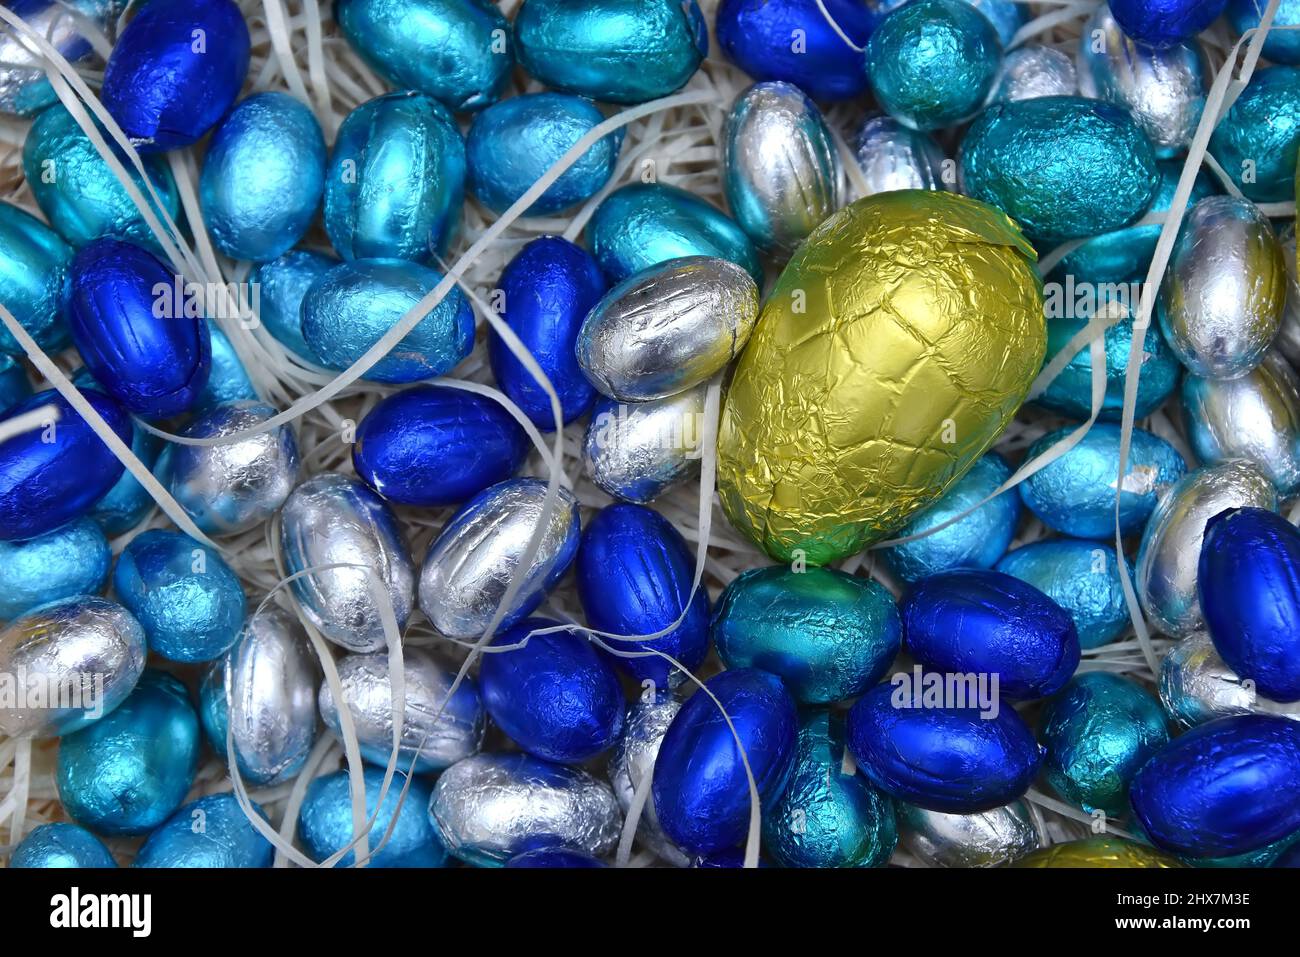 Pile of colorful pastel foil wrapped chocolate easter eggs in blue,  silver and turquoise with a large yellow egg in the middle, on pale background. Stock Photo